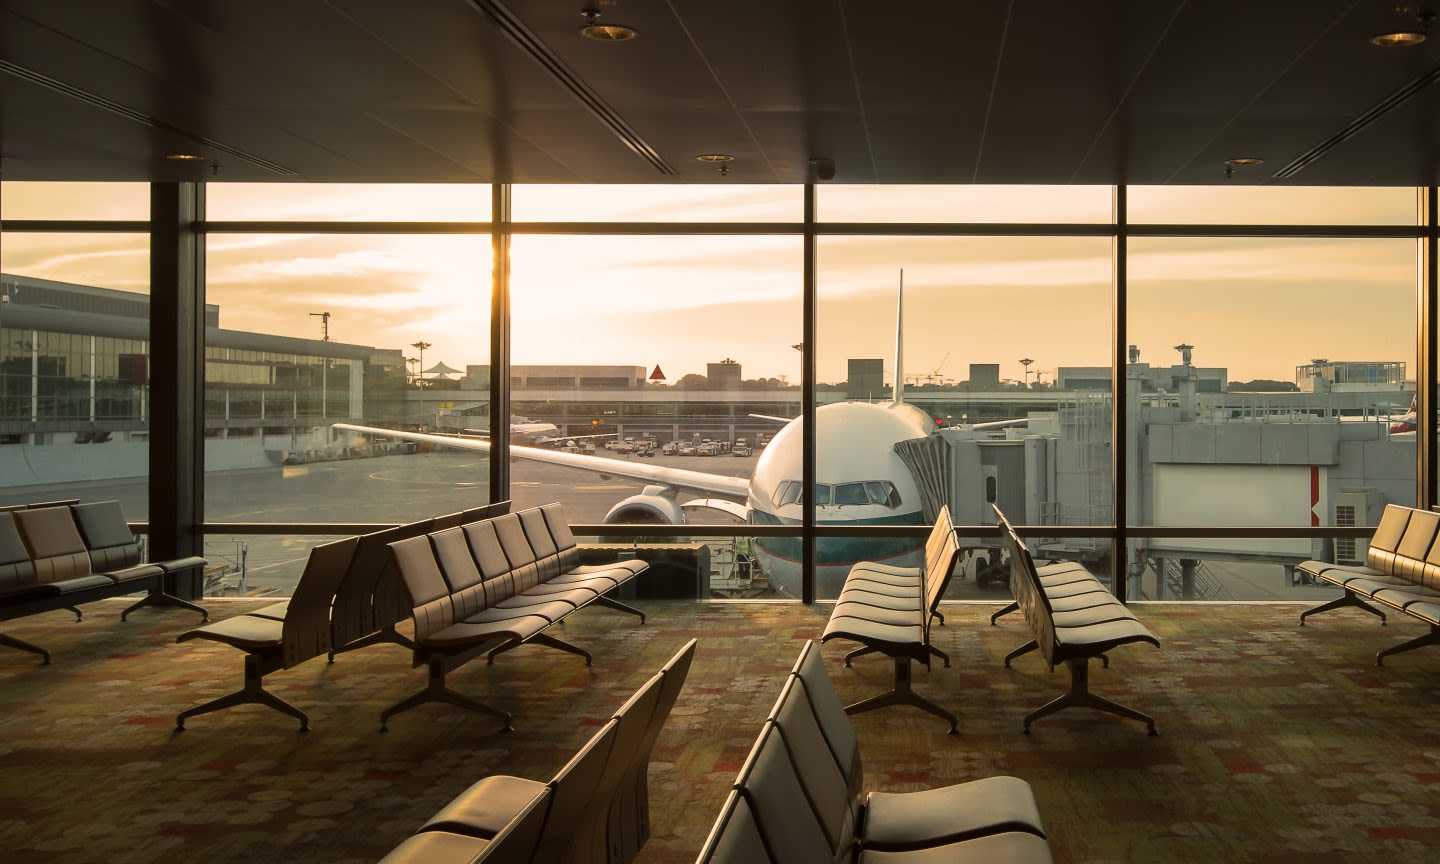 Nashville Airport Lounges: What to Know - NerdWallet